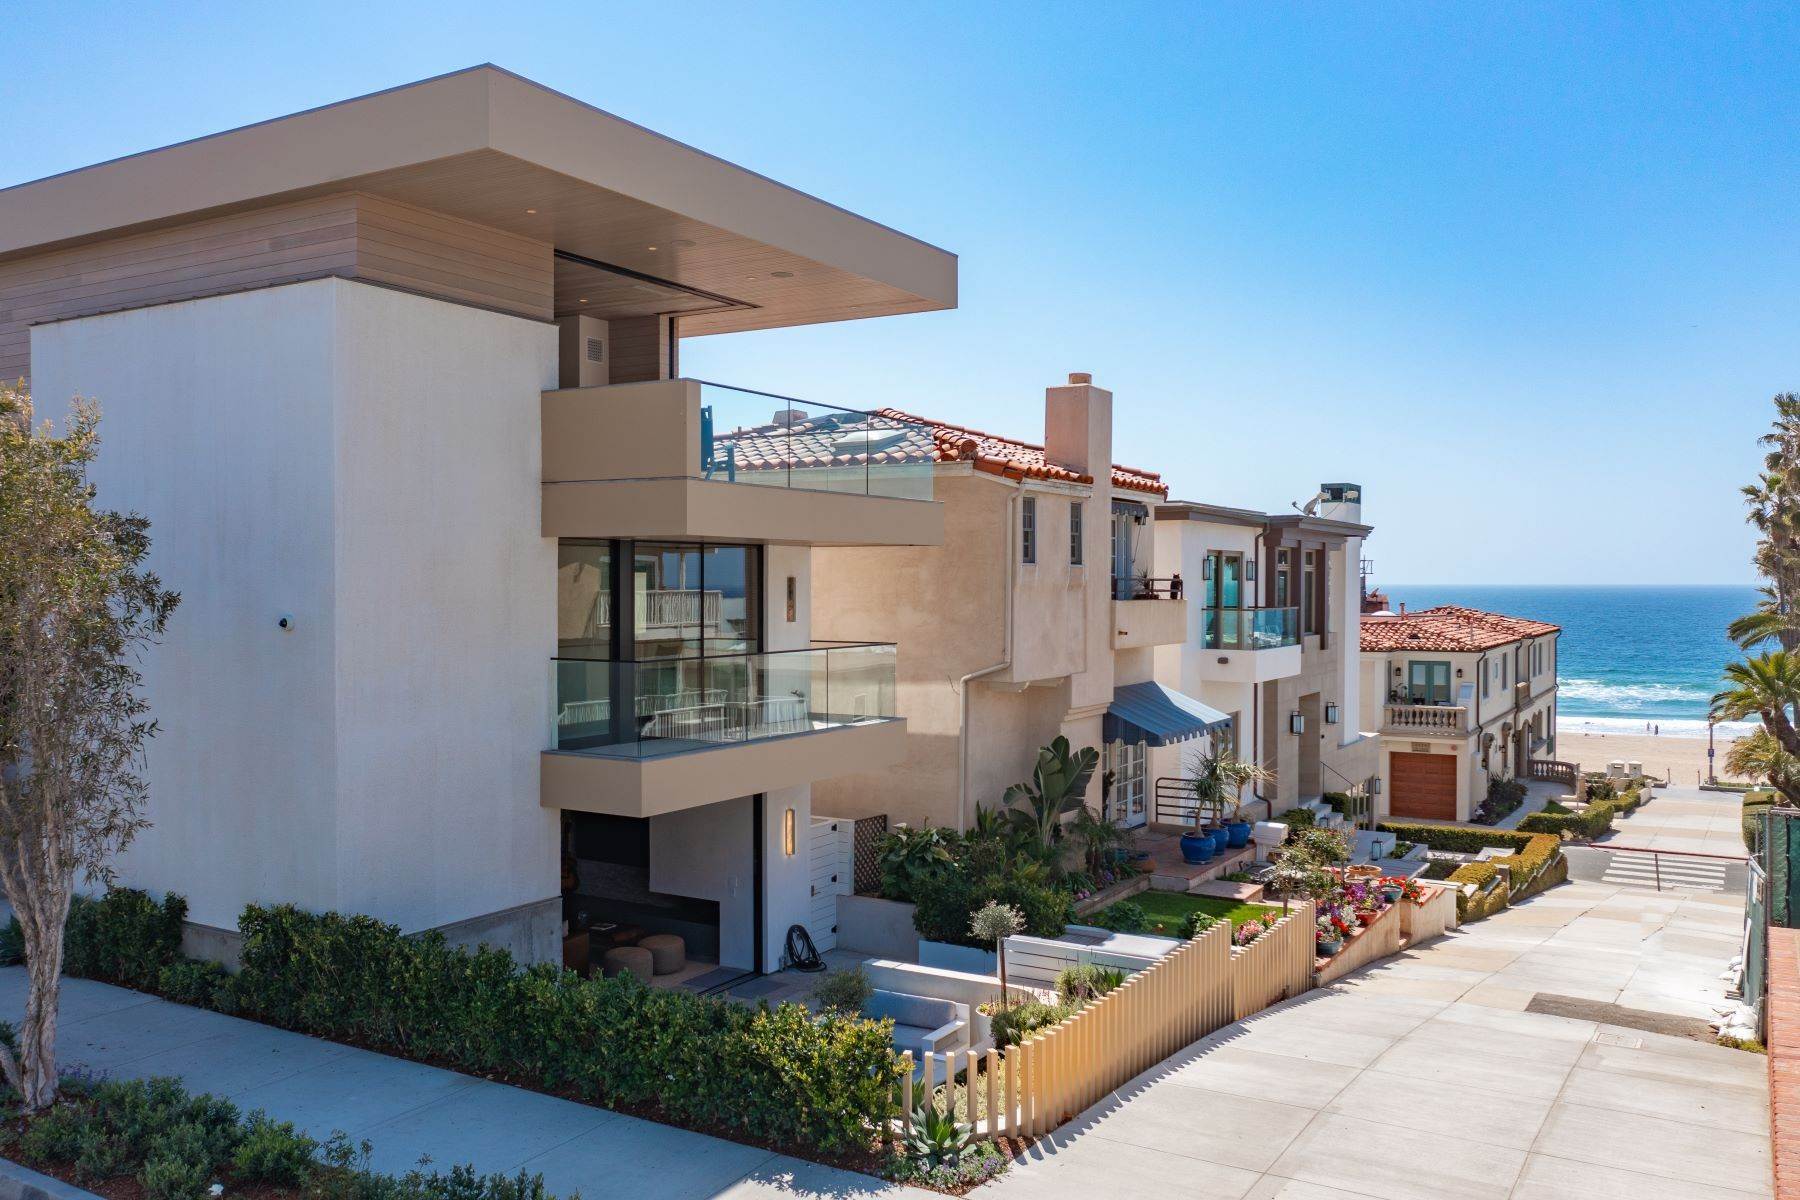 Single Family Homes for Active at 2415 Manhattan Avenue, Manhattan Beach, CA 90266 2415 Manhattan Avenue Manhattan Beach, California 90266 United States